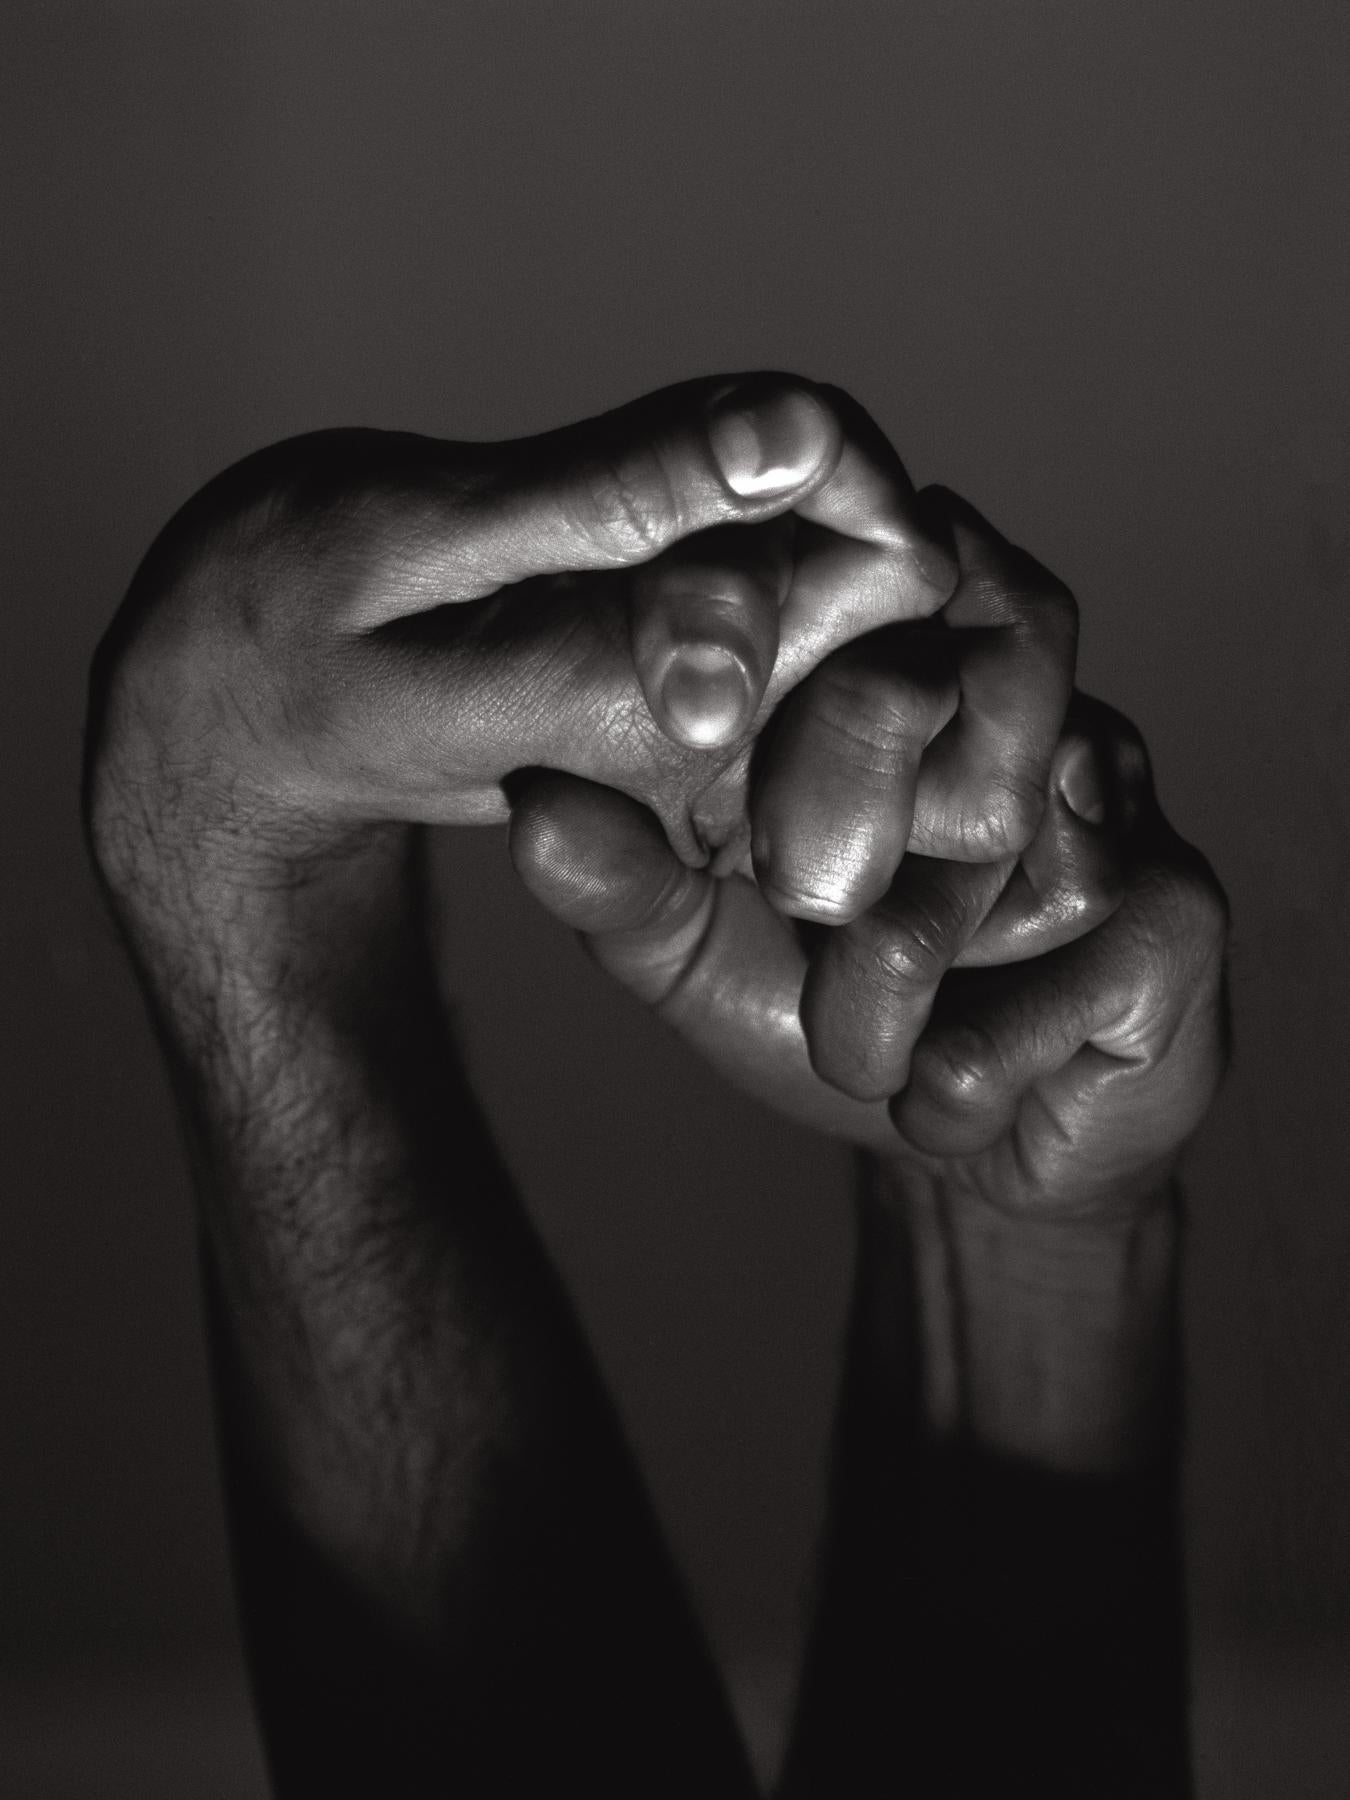 Doug Birkenheuer Figurative Photograph - Hands Together - Intertwined Hands, Silver Gelatin Print, Matted and Framed